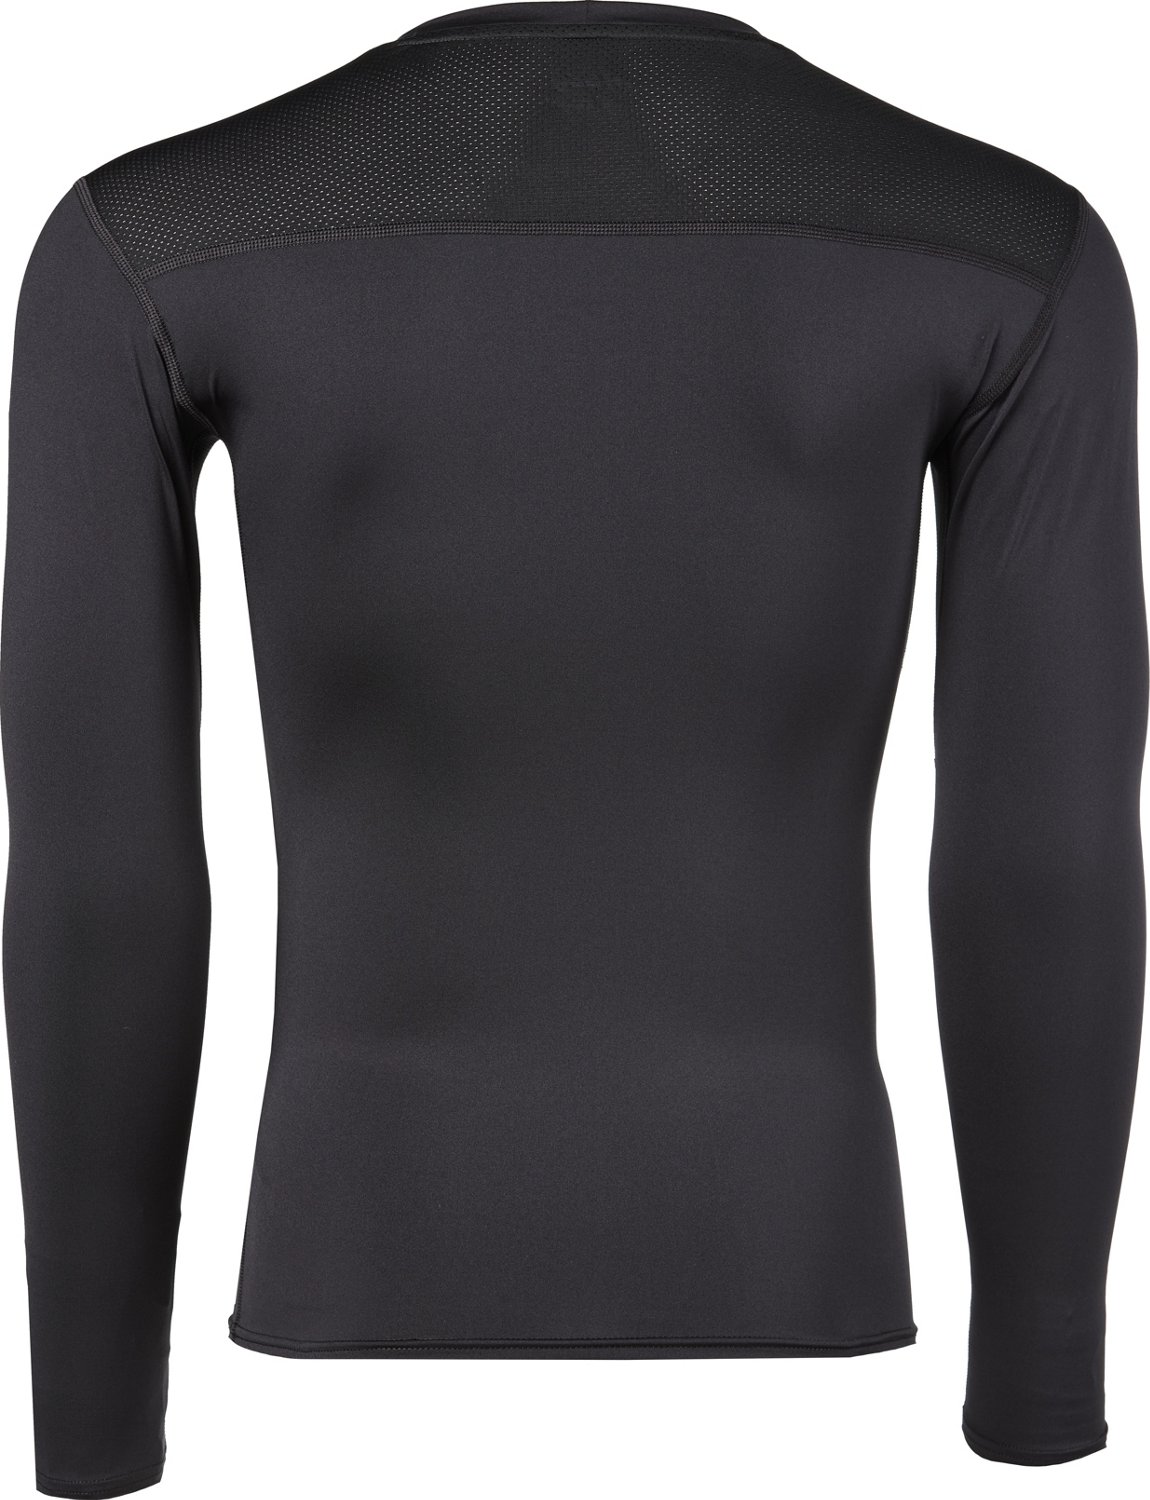 Mens Compression Shirt Wicking Training Base Layer Gym Long Sleeve